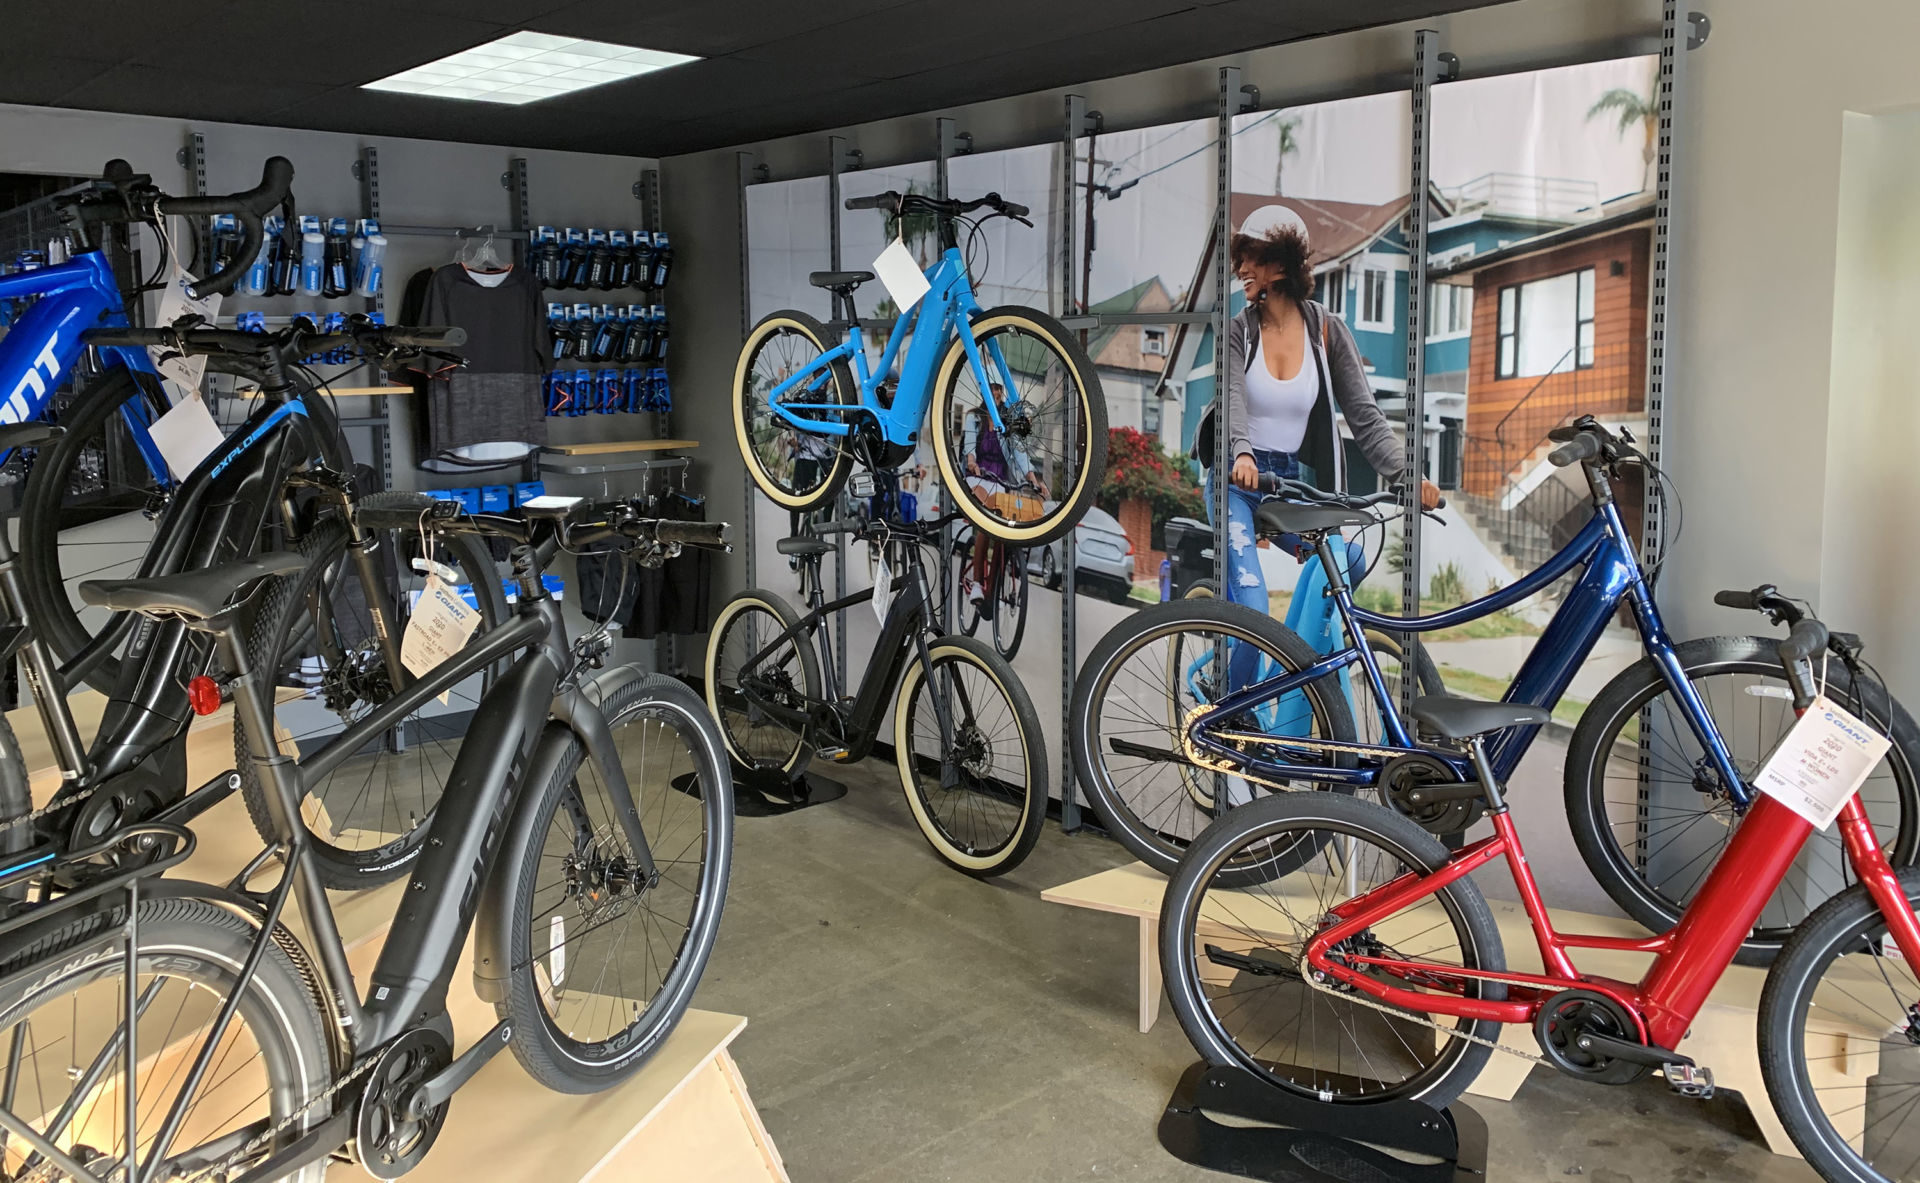 Southern California Motorcycles’ new E-bicycle dealership in Brea, California. Photo courtesy of Southern California Motorcycles.